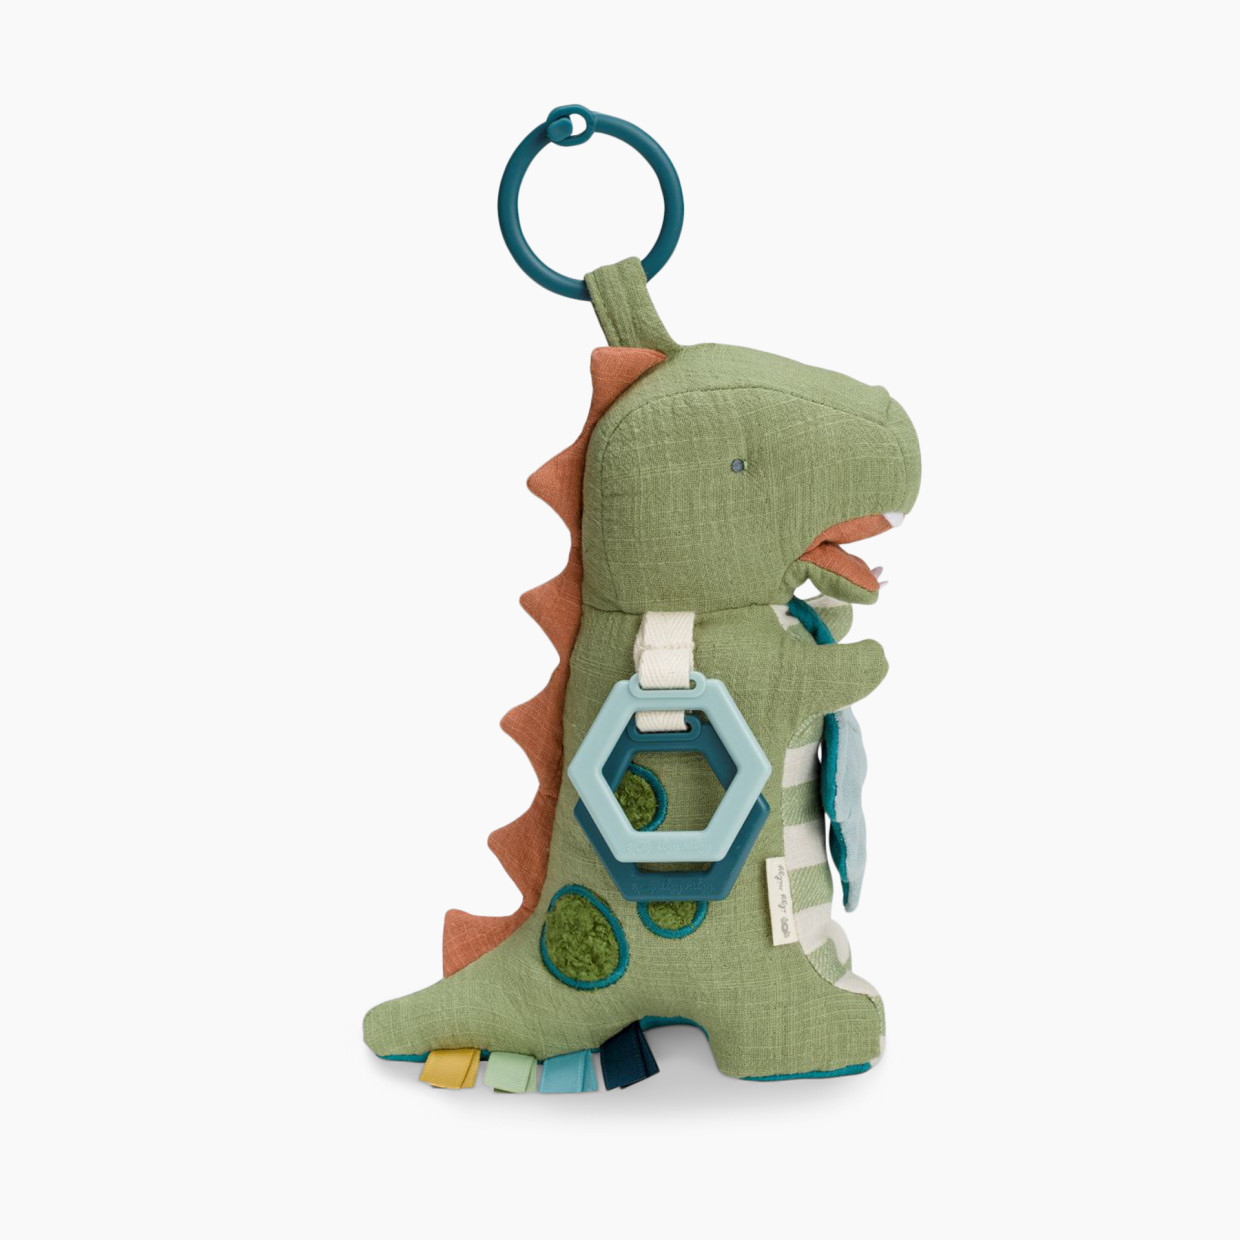 Itzy Ritzy Link & Love Activity Plush with Teether - Dino.